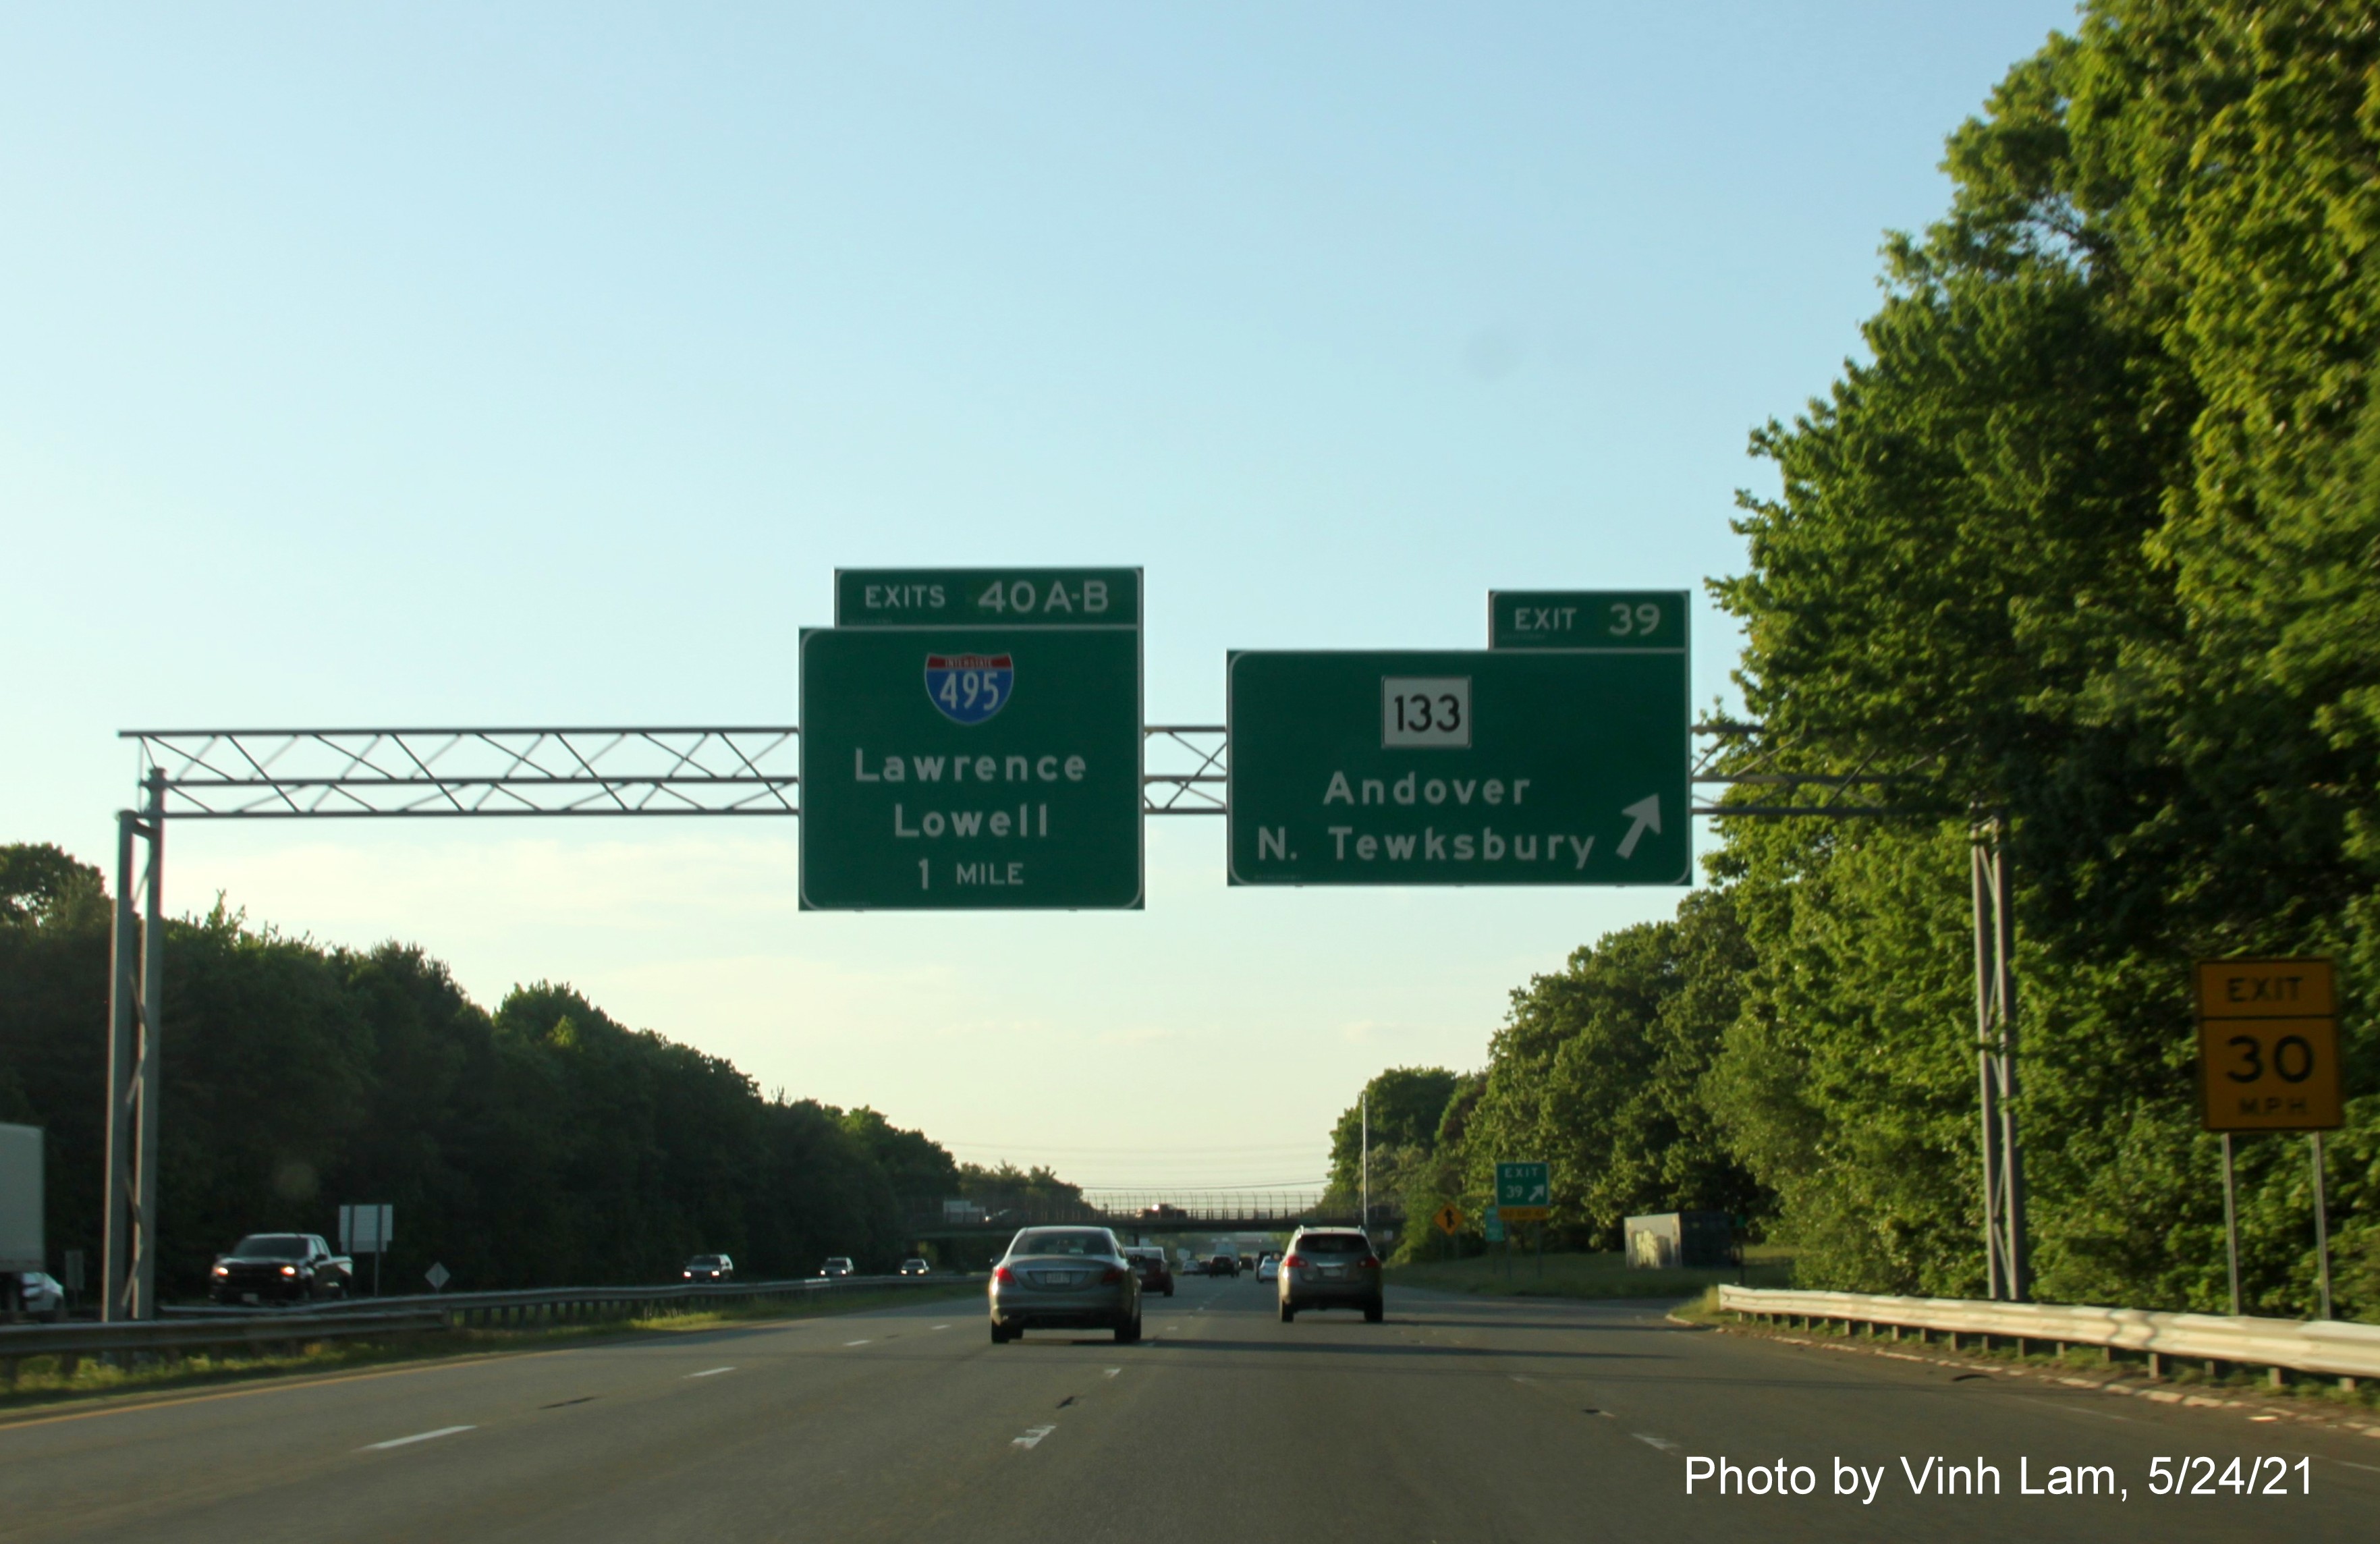 Image of overhead ramp sign for MA 133 East exit with new milepost based exit number on I-93 North in Andover, by Vinh Lam, May 2021